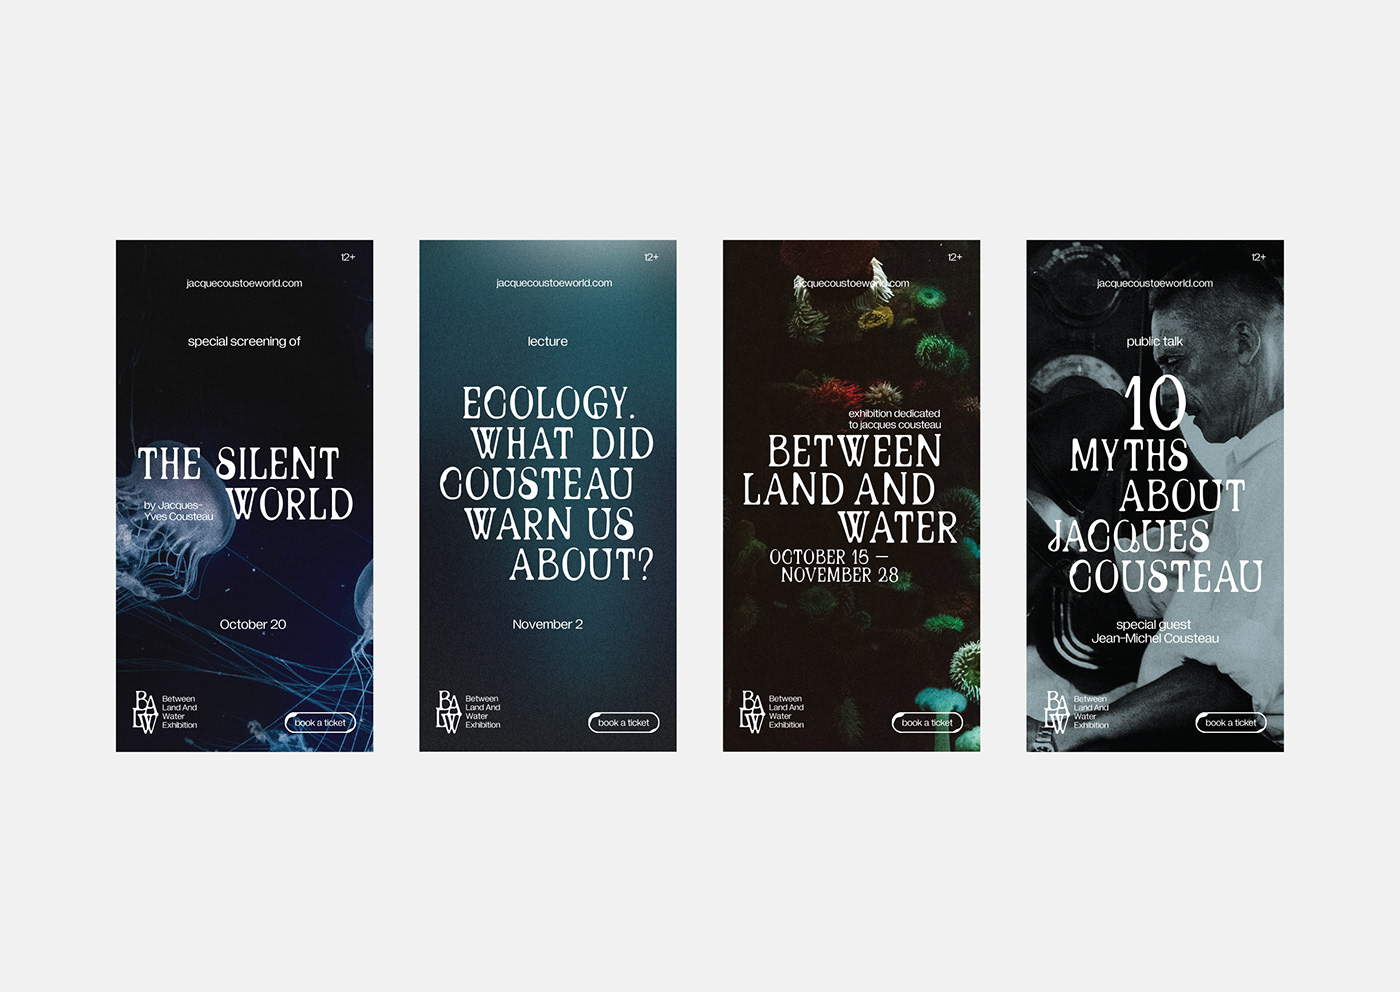 exhibition identity identity Jacques Cousteau Jacques-Yves Cousteau Marine design merch design student project typeface design underwater